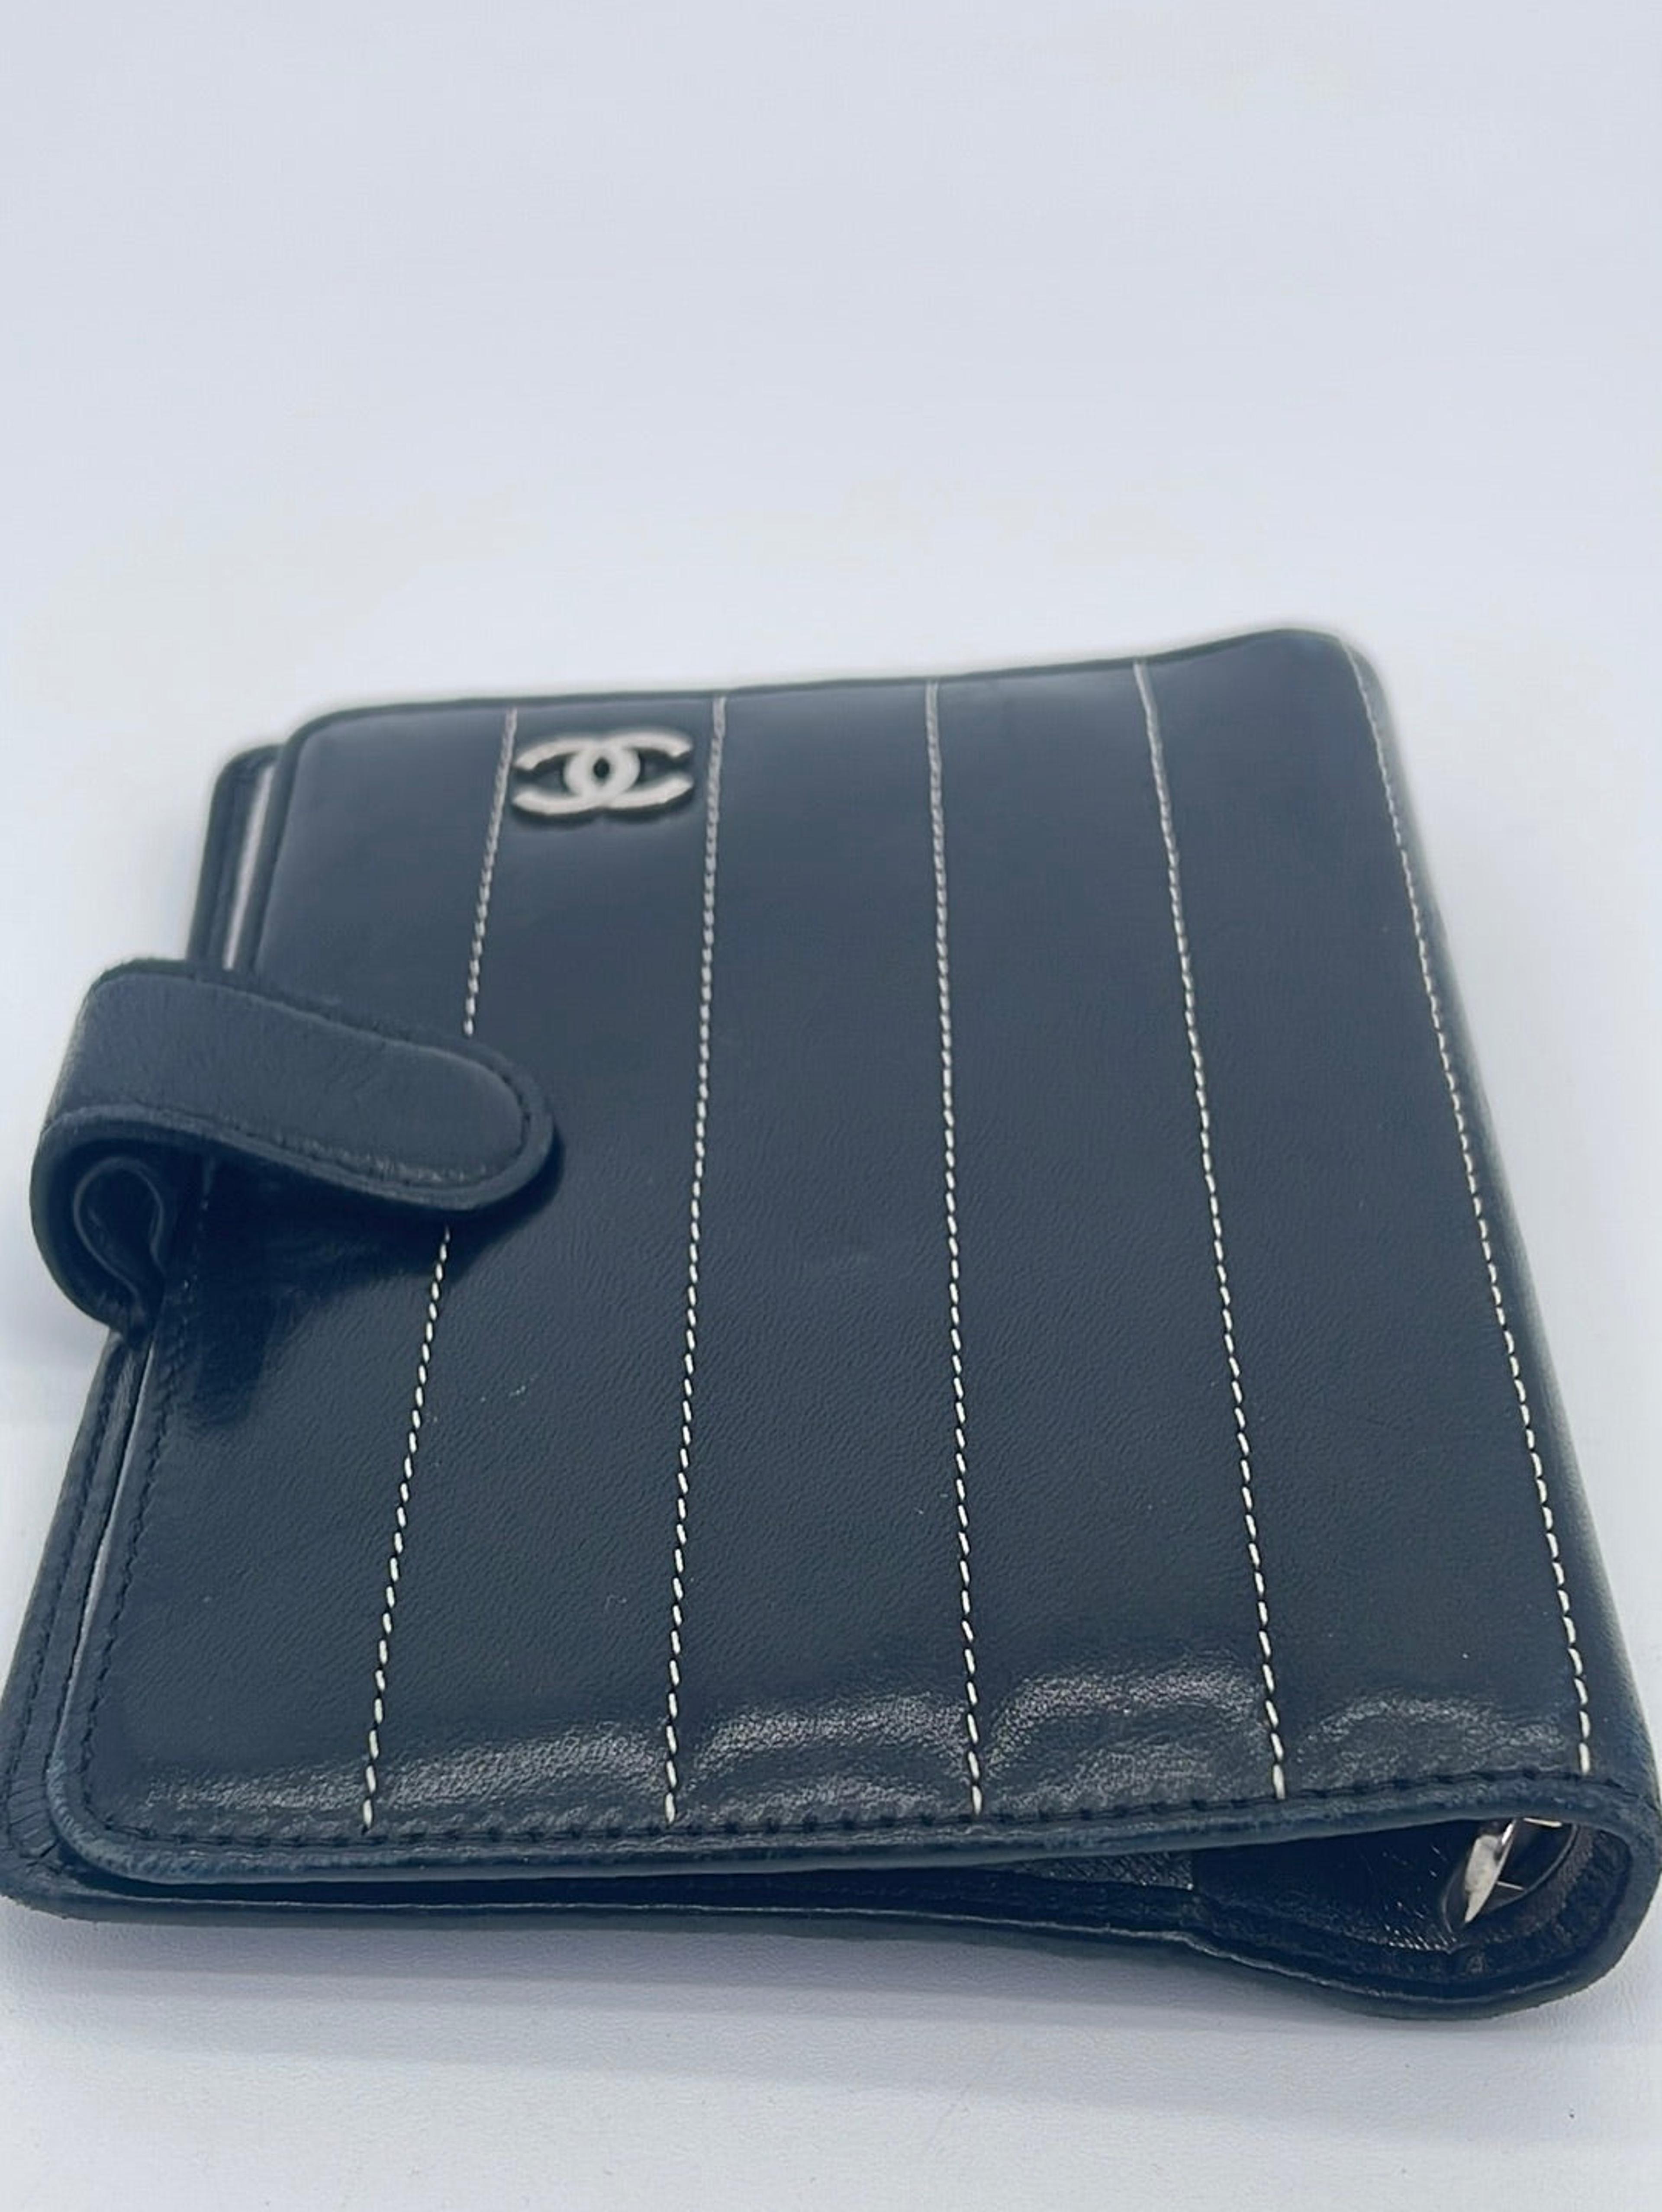 Preloved CHANEL Black Leather Agenda Notebook Cover 10398160 030123 –  KimmieBBags LLC